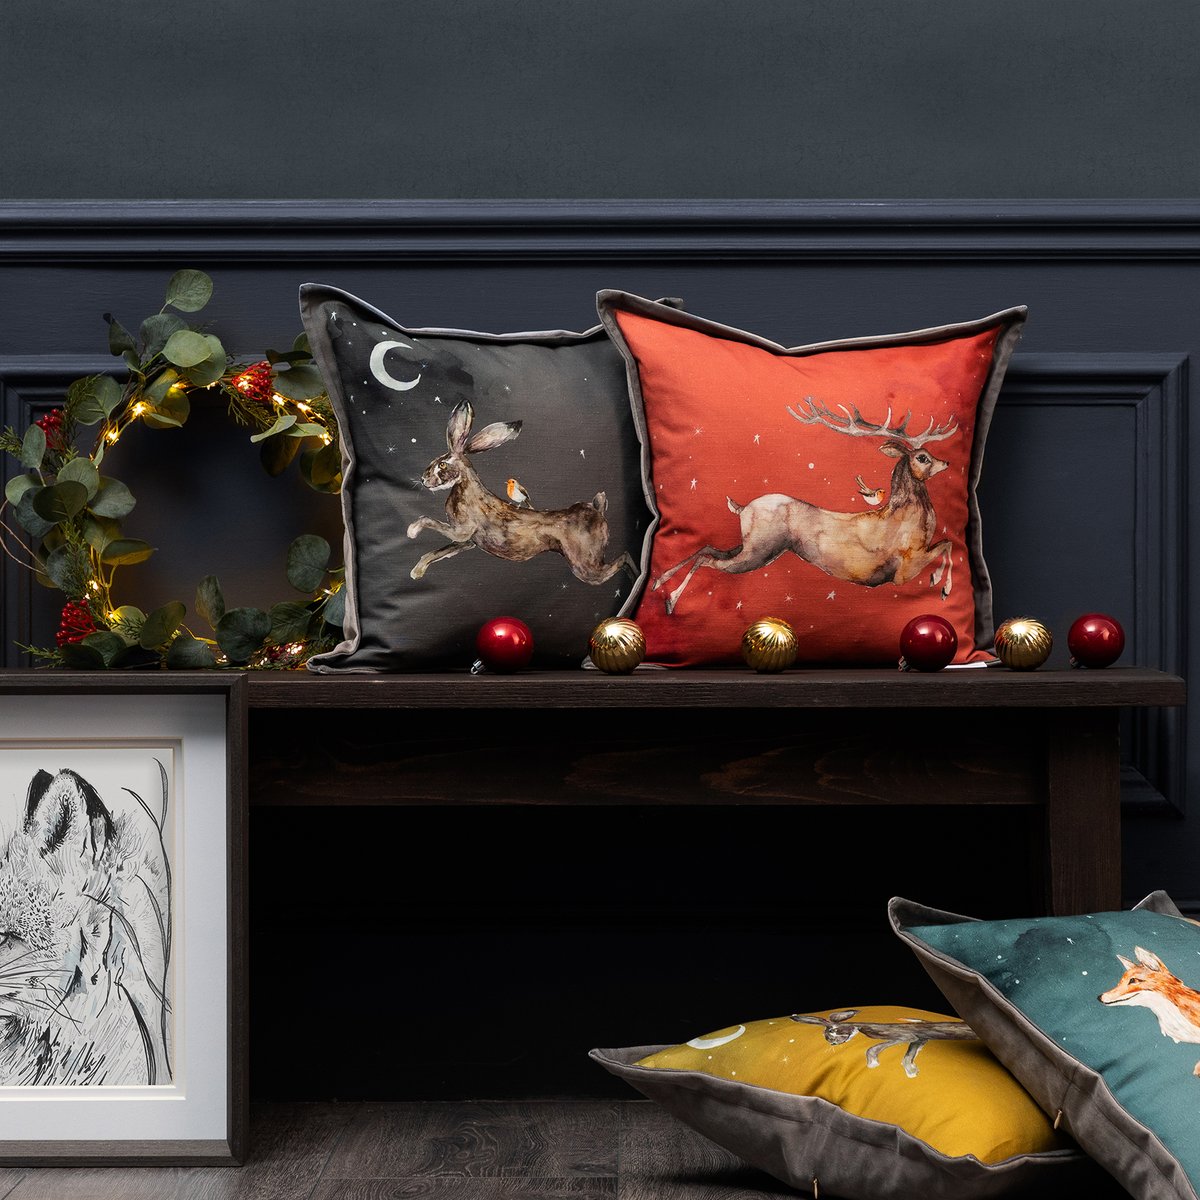 Create a festive feeling in your home with our beautiful Christmas cushions! Shop now at voyageoutlet.com/collections/ch…